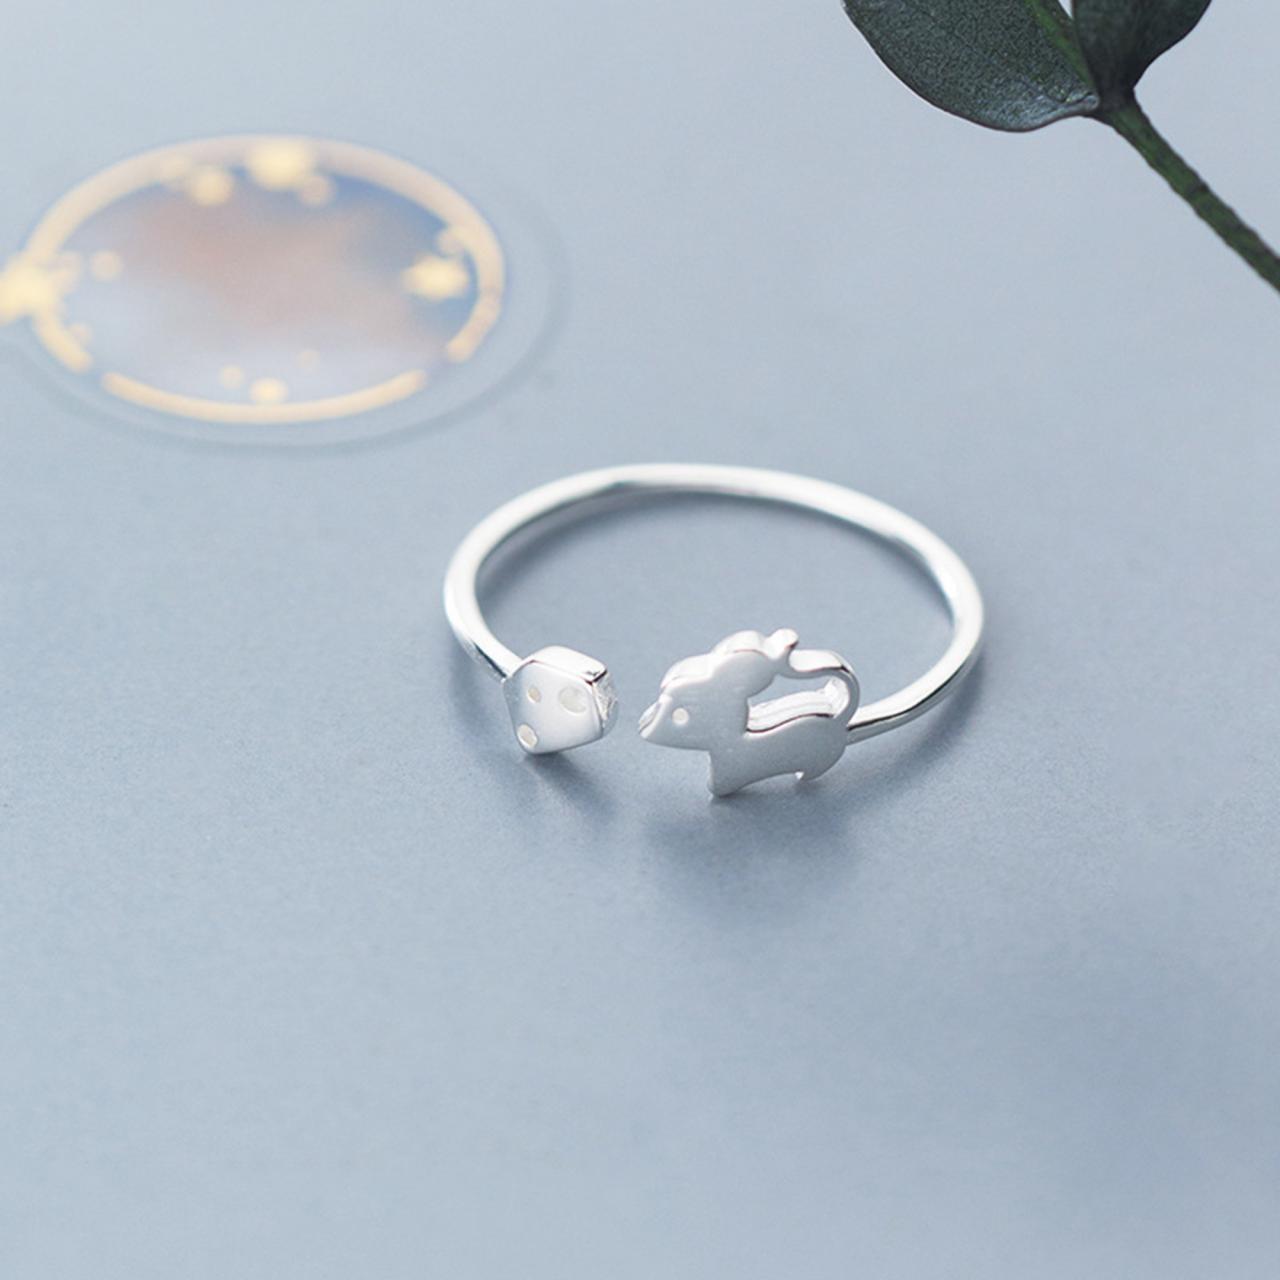 Fashion Mouse, Sterling Silver Adjustable Mouse Ring, Minimalist Rings, Dainty Ring, Women Ring, Everyday Jewelry